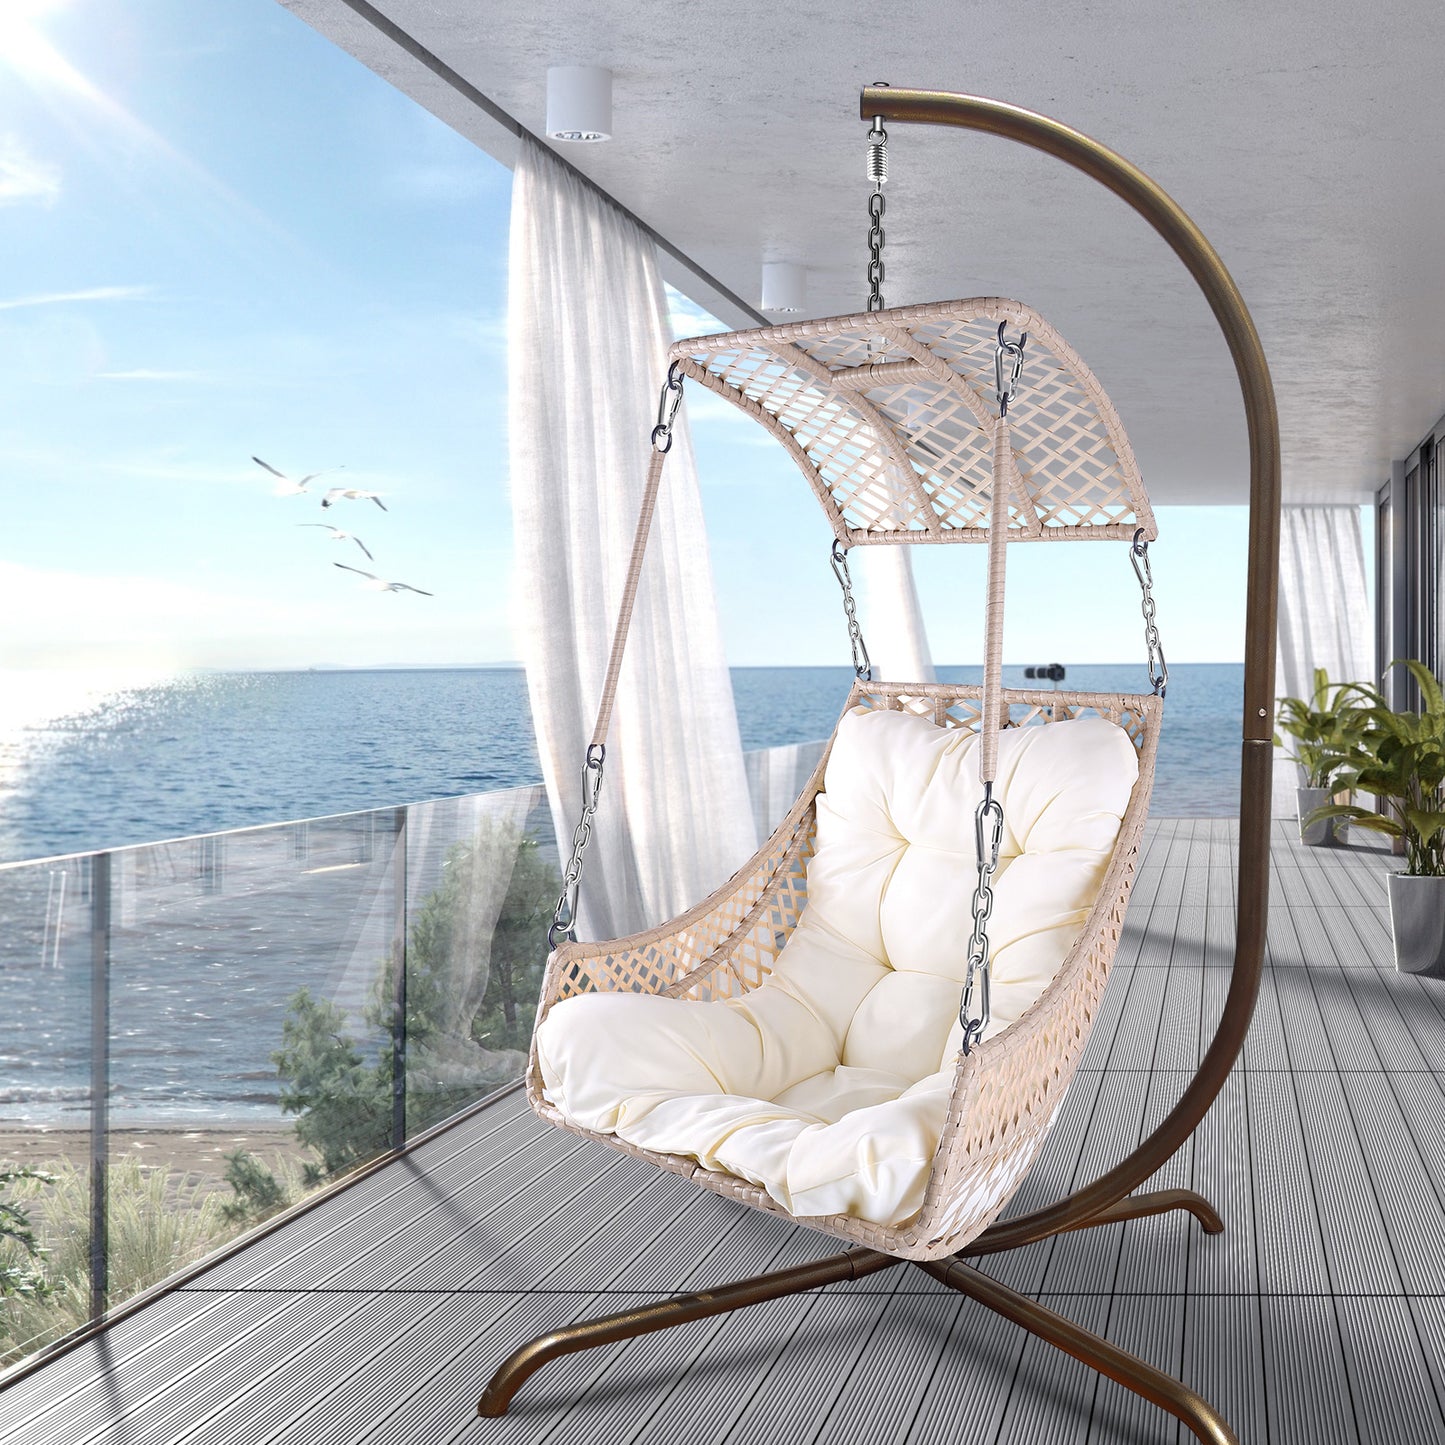 Swing Egg Chair with Stand Indoor Outdoor, UV Resistant Cushion Hanging Chair with Cup Holder, Anti-Rust with Wicker Rattan Frame 350lbs Capacity Hammock Chair for Patio Bedroom-Beige, New Design